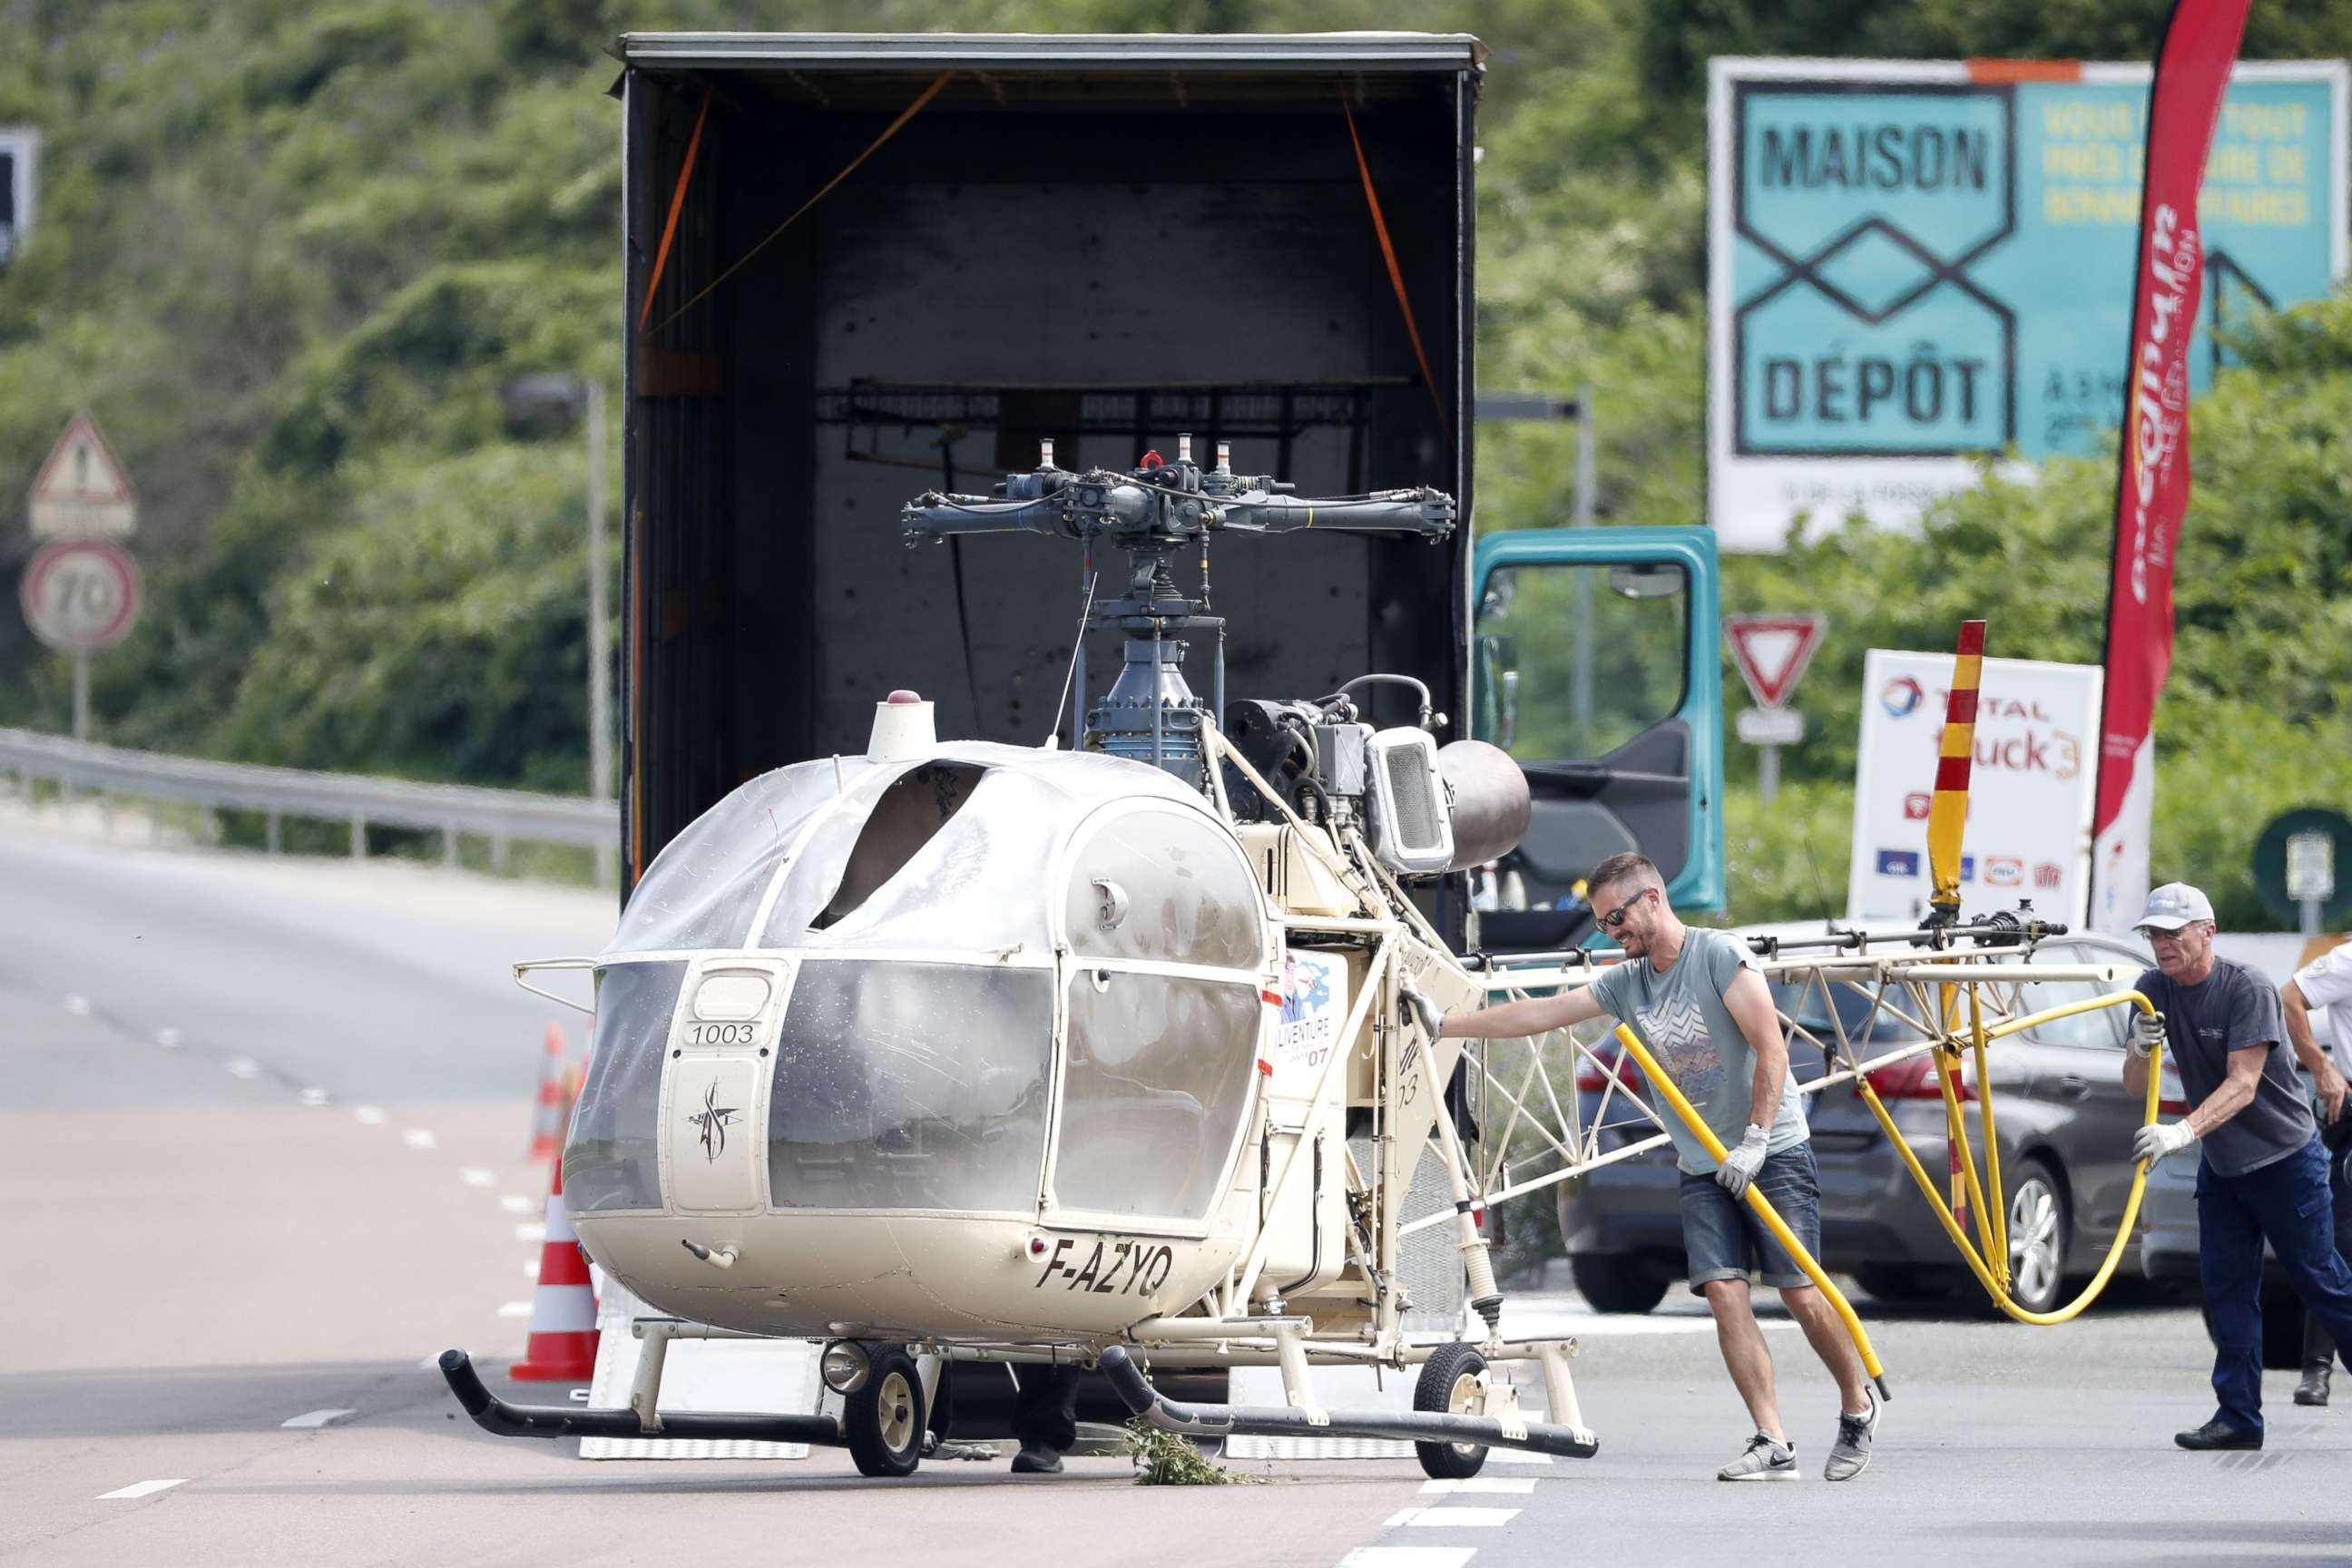 PHOTO: Investigators trasnport an Alouette II helicopter allegedly abandoned by French prisoner Redoine Faid and suspected accomplices after his escape from the prison of Reau, in Gonesse, north of Paris, July 1, 2018.